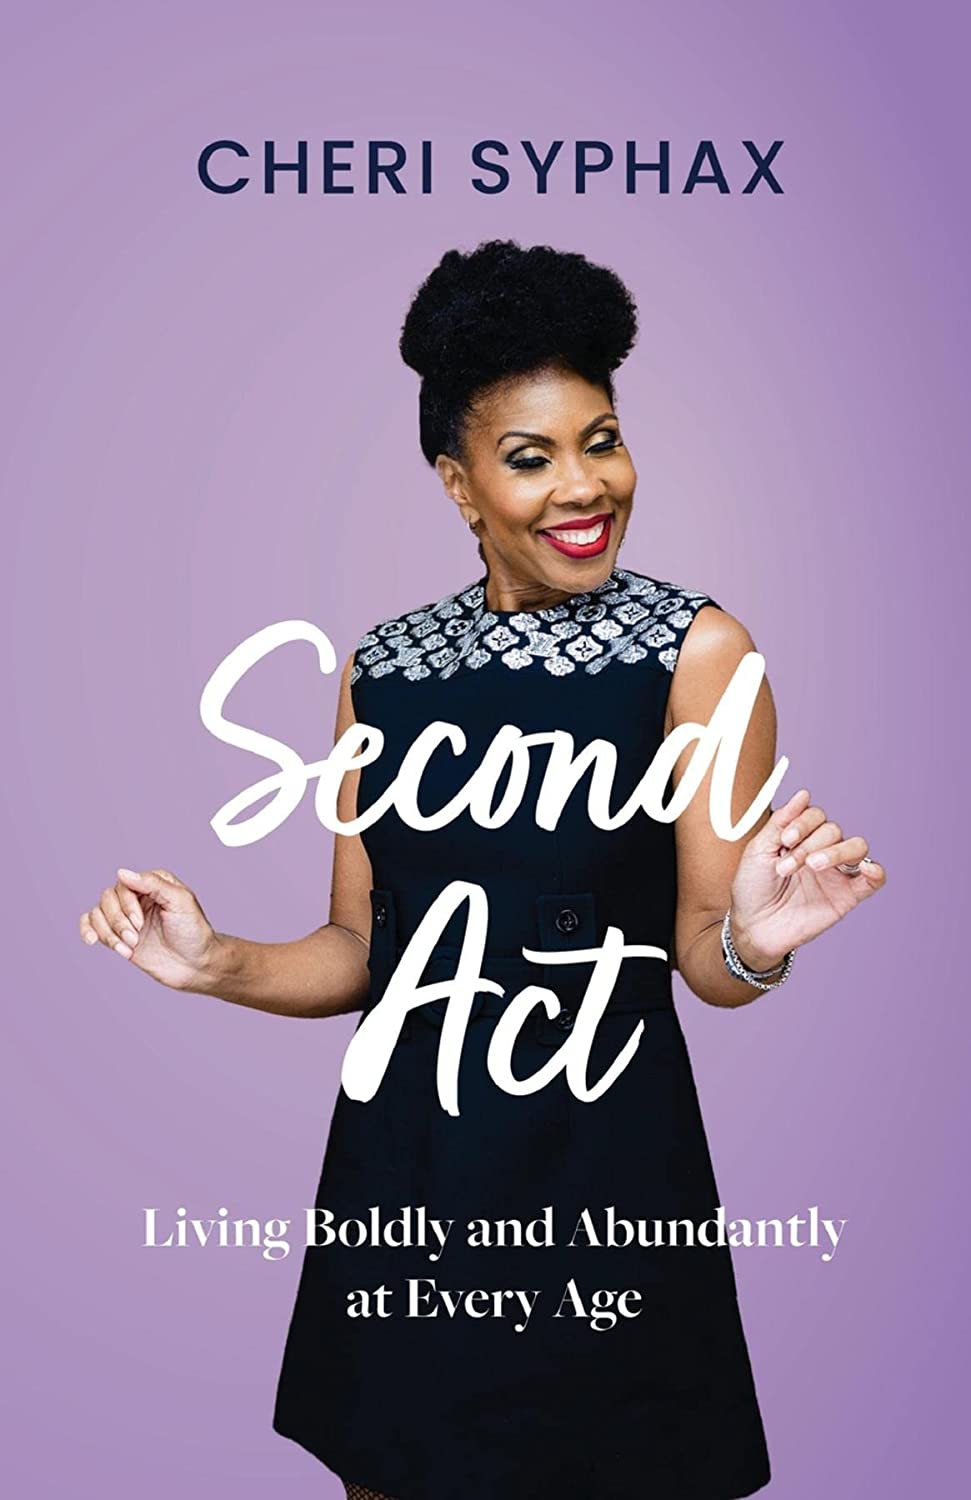 "Second Act" By Cheri Syphax